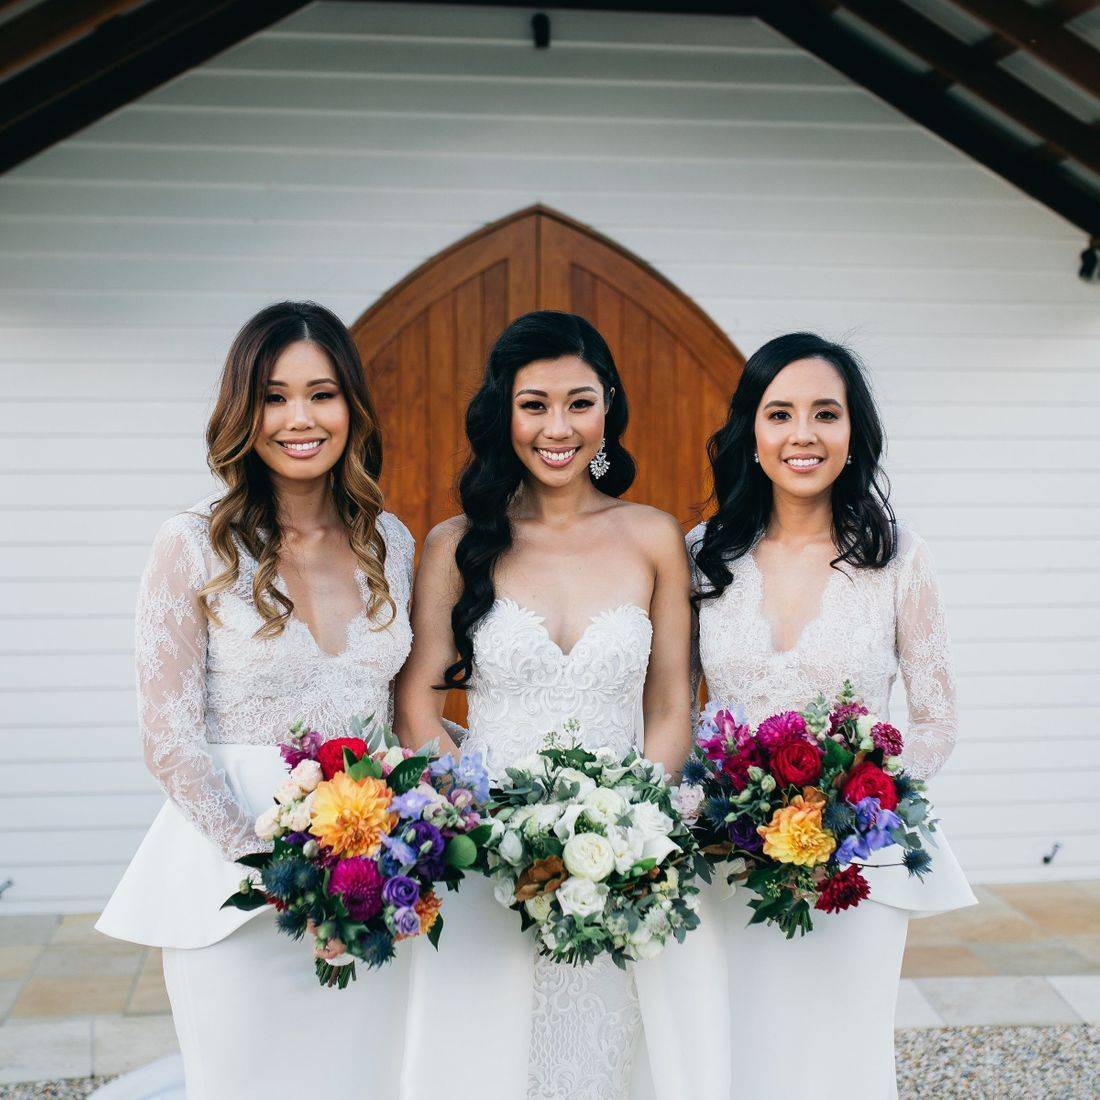 three women in bridal attire holding bouquets of flowers